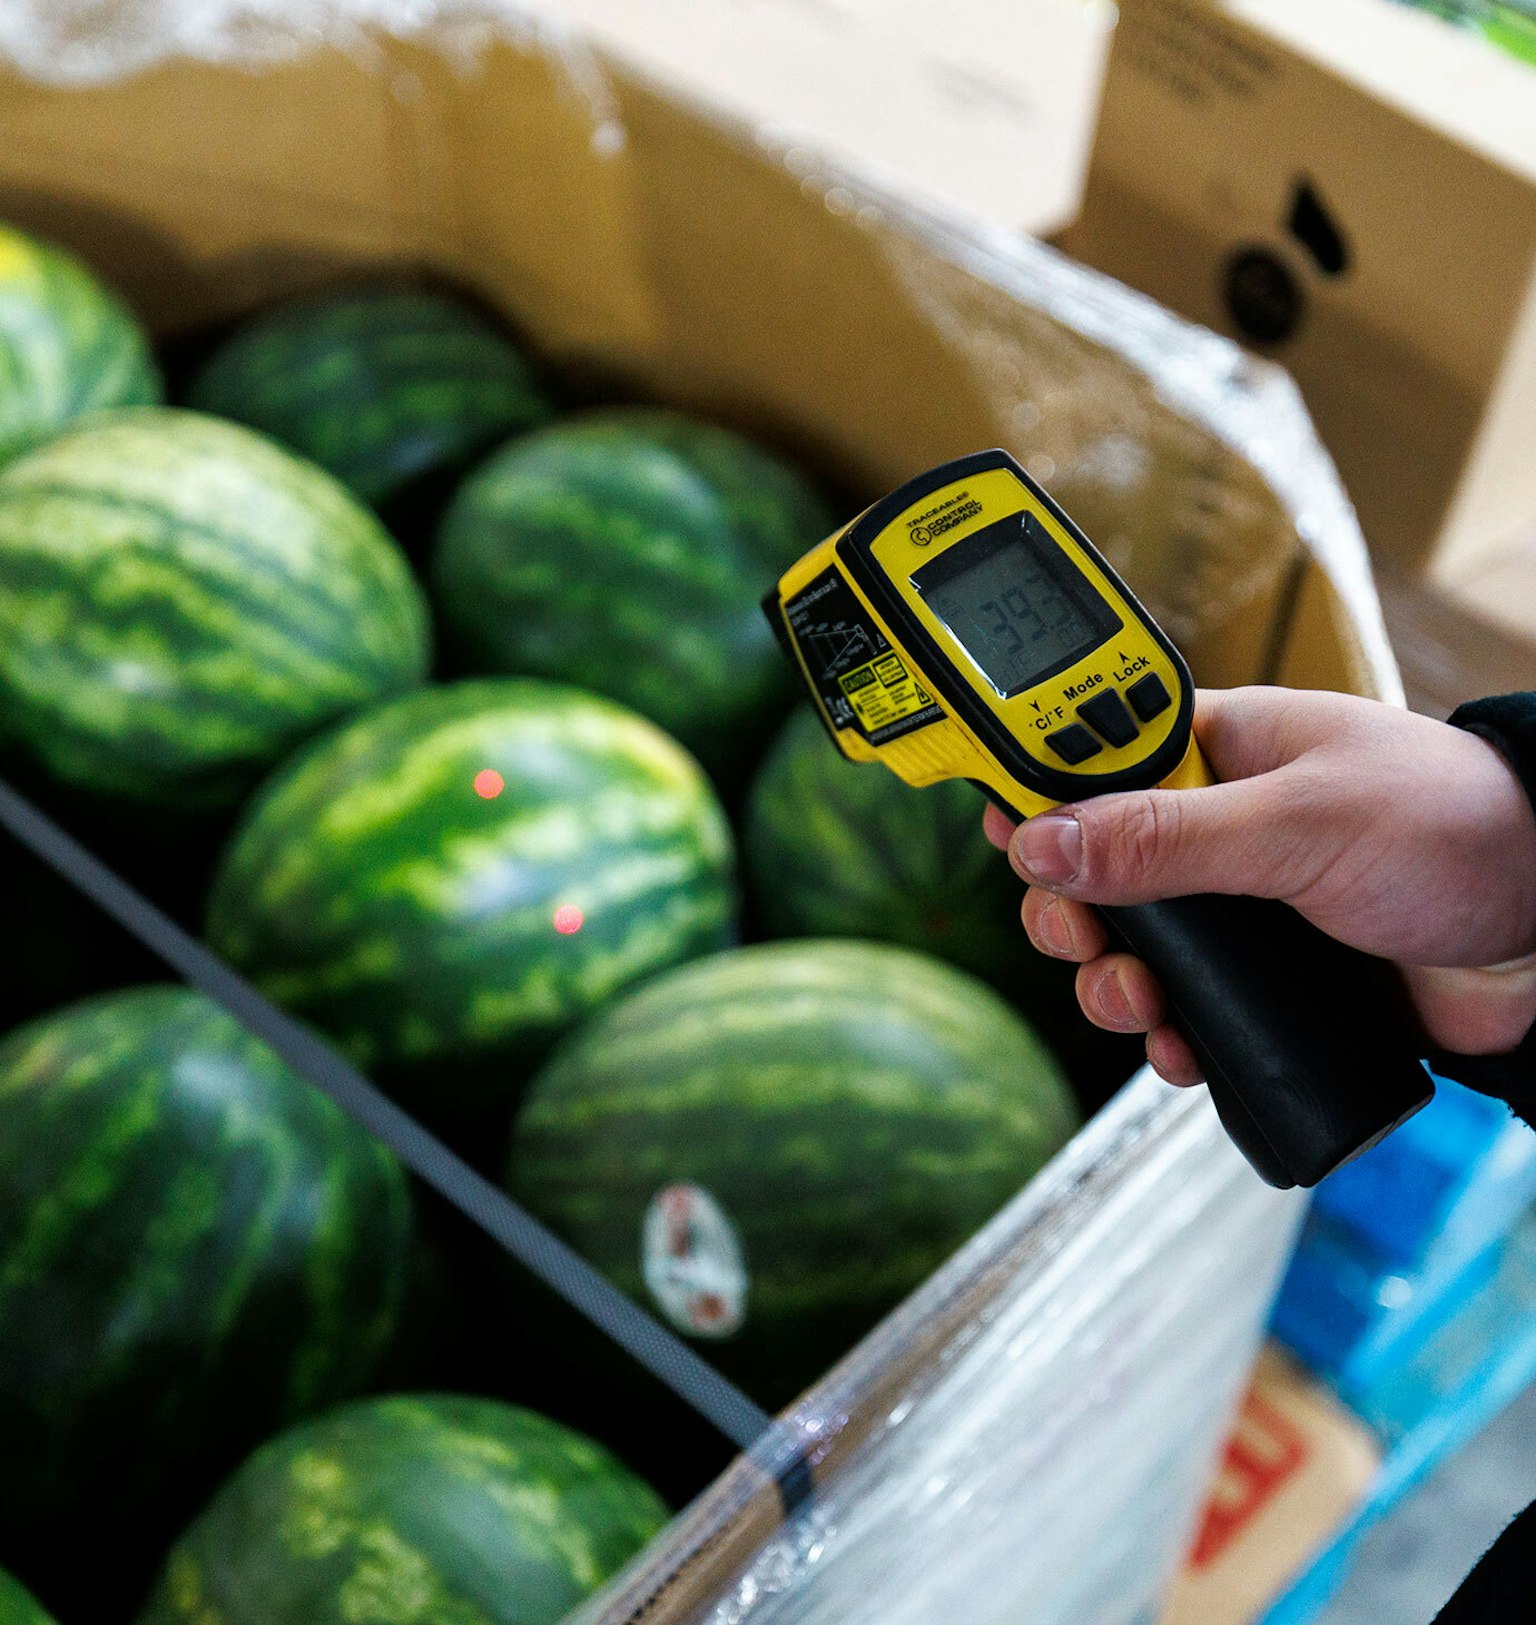 A Groupe Morneau employee ensures quality control by checking a watermelon’s temperature for a delivery.